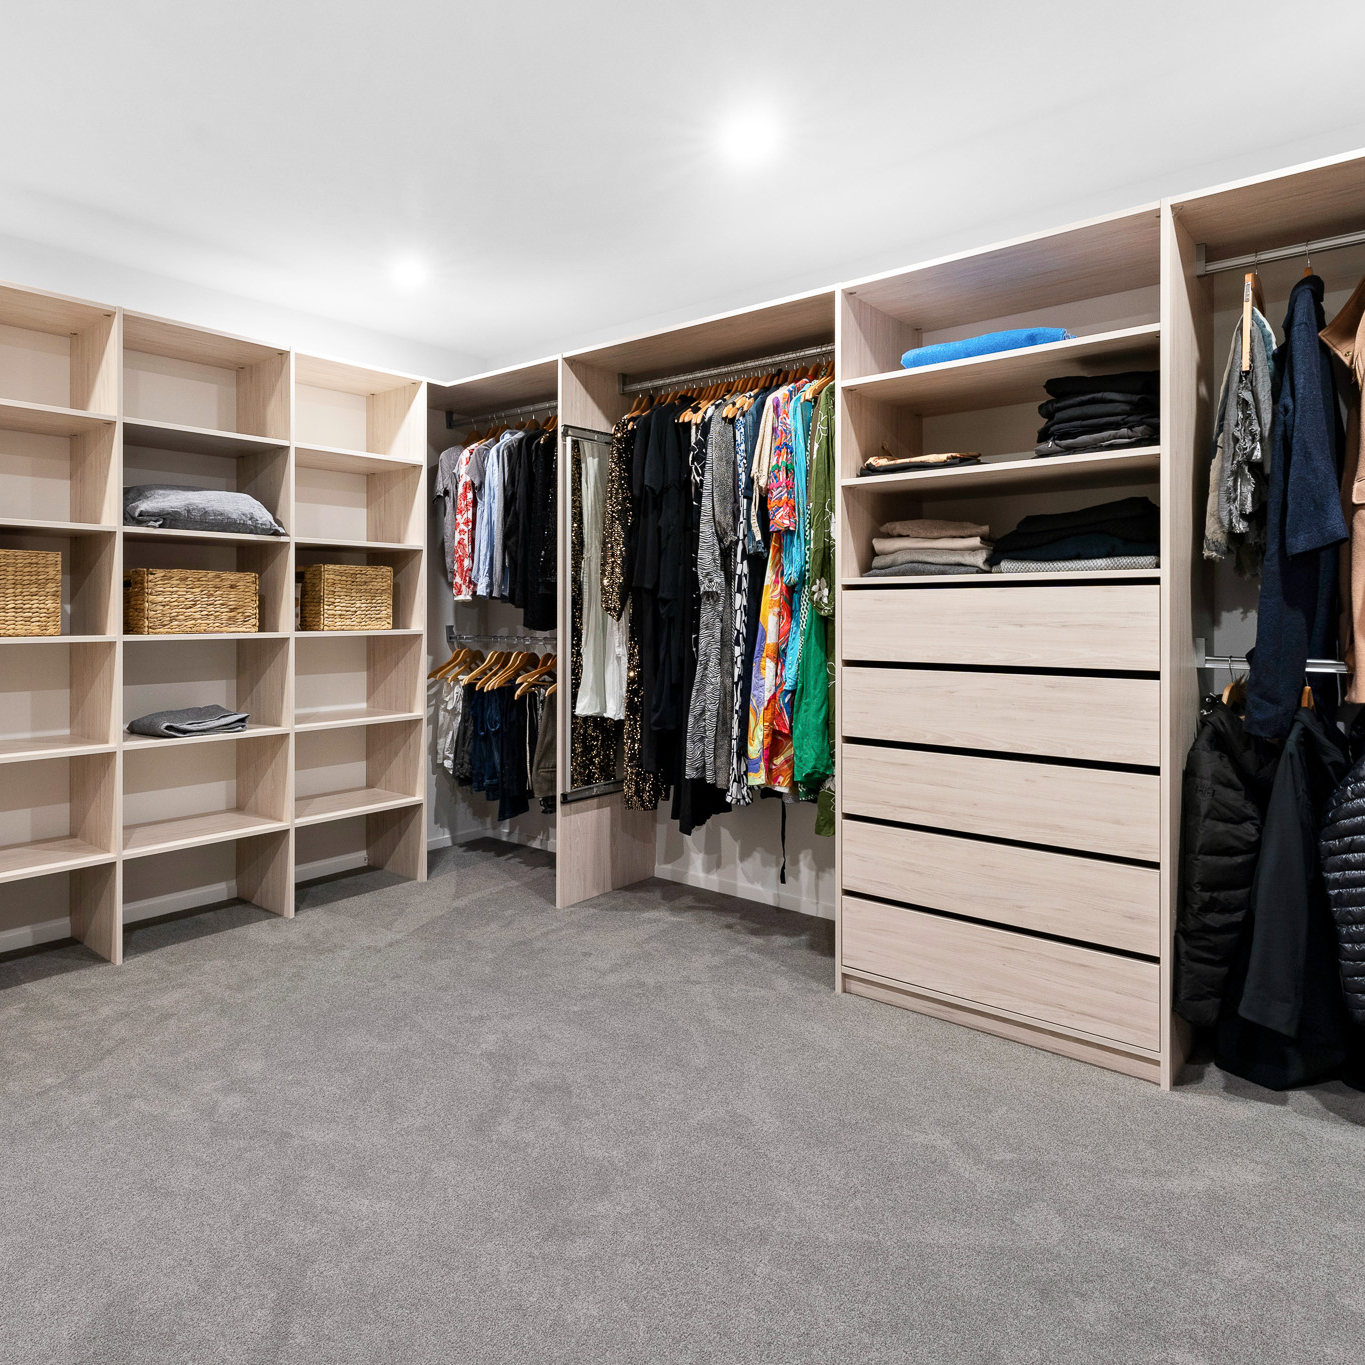 Flex walk-in wardrobe organiser in light woodgrain colour, wide shot showing the whole space which is large